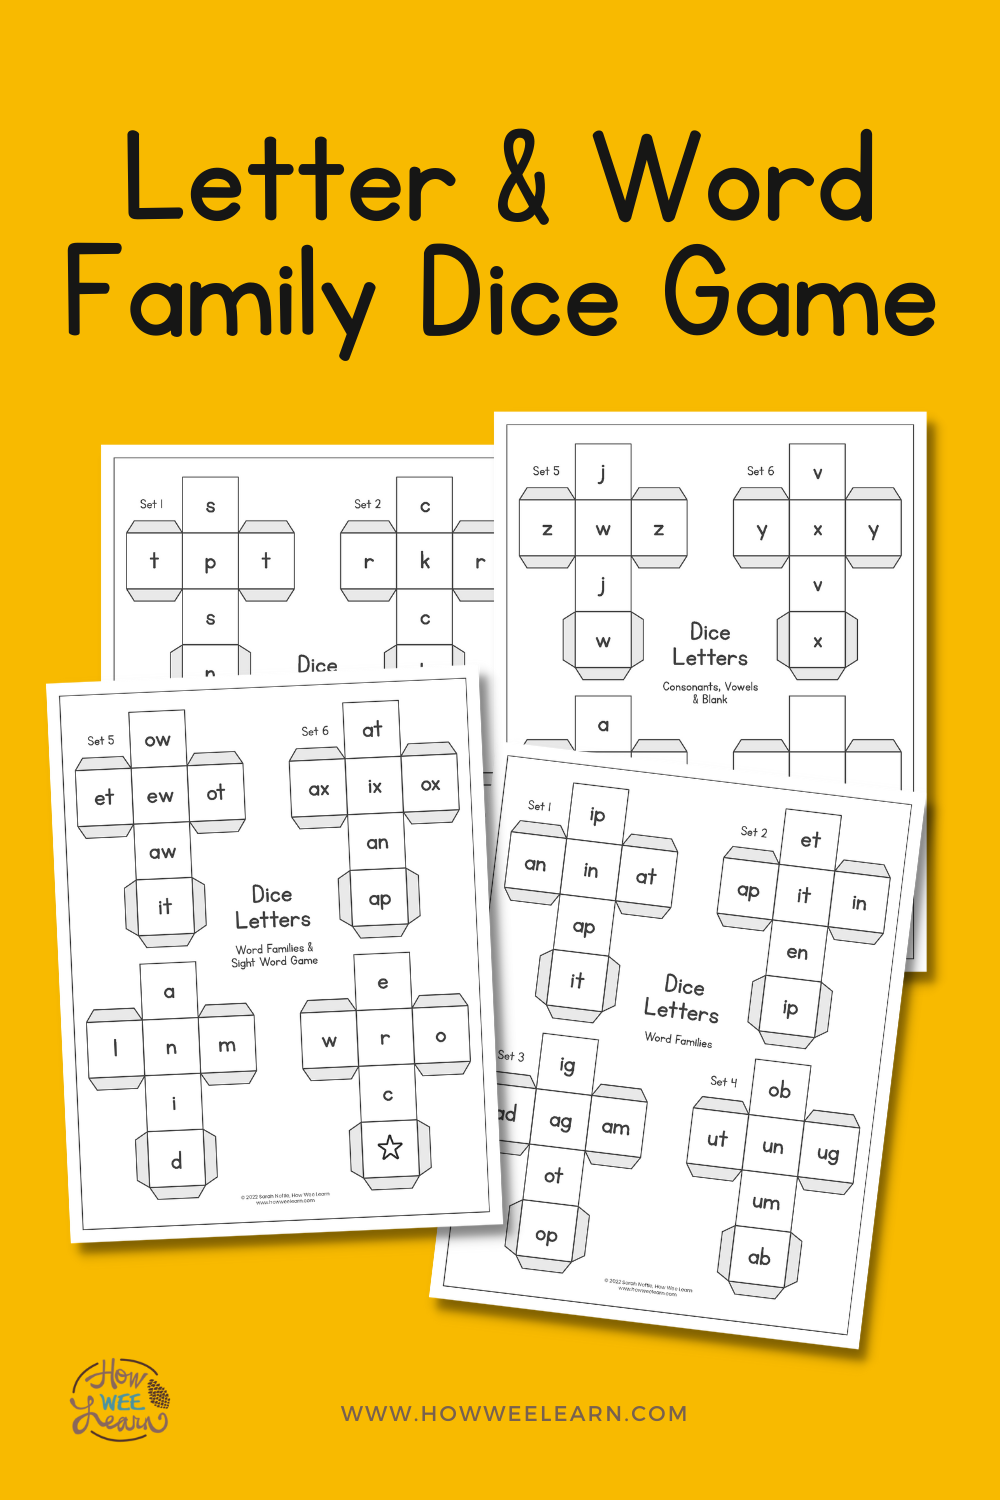 Printable Letter & Word Family Dice Game – How Wee Learn